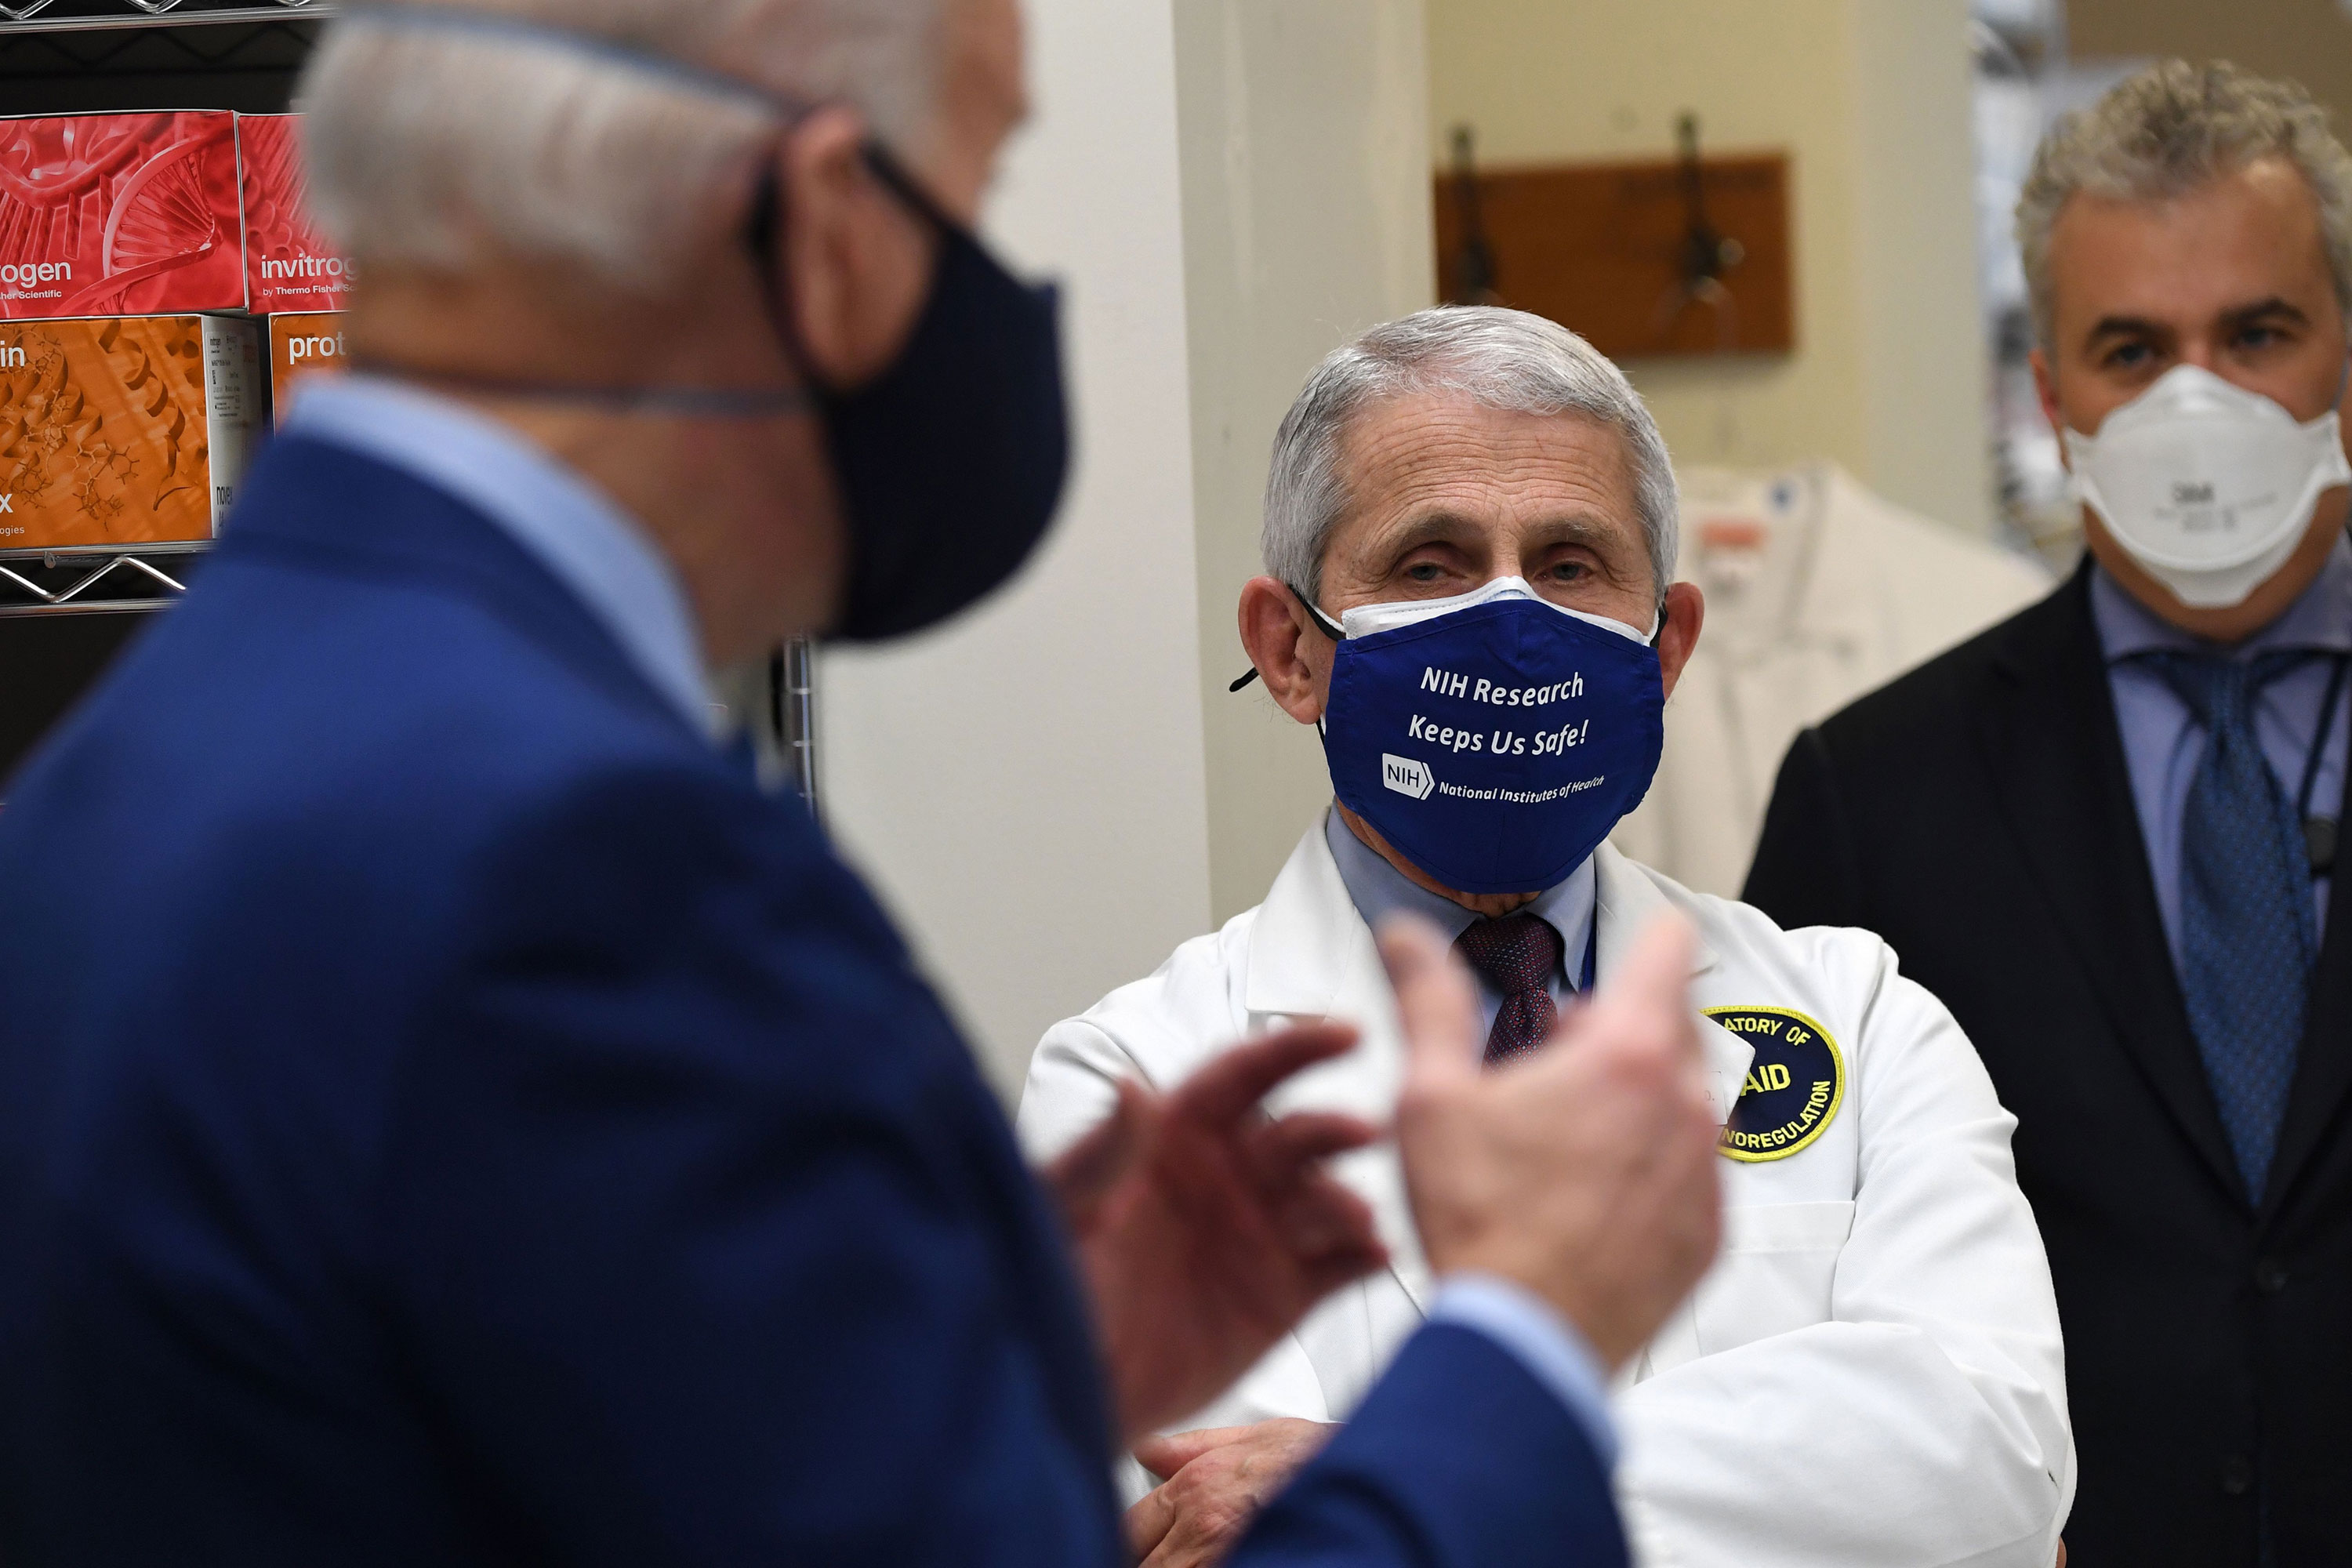 Dr. Anthony Fauci listens as President Joe Biden speaks during a tour of the Viral Pathogenesis Laboratory at the National Institutes of Health in Bethesda, Maryland, on February 11.